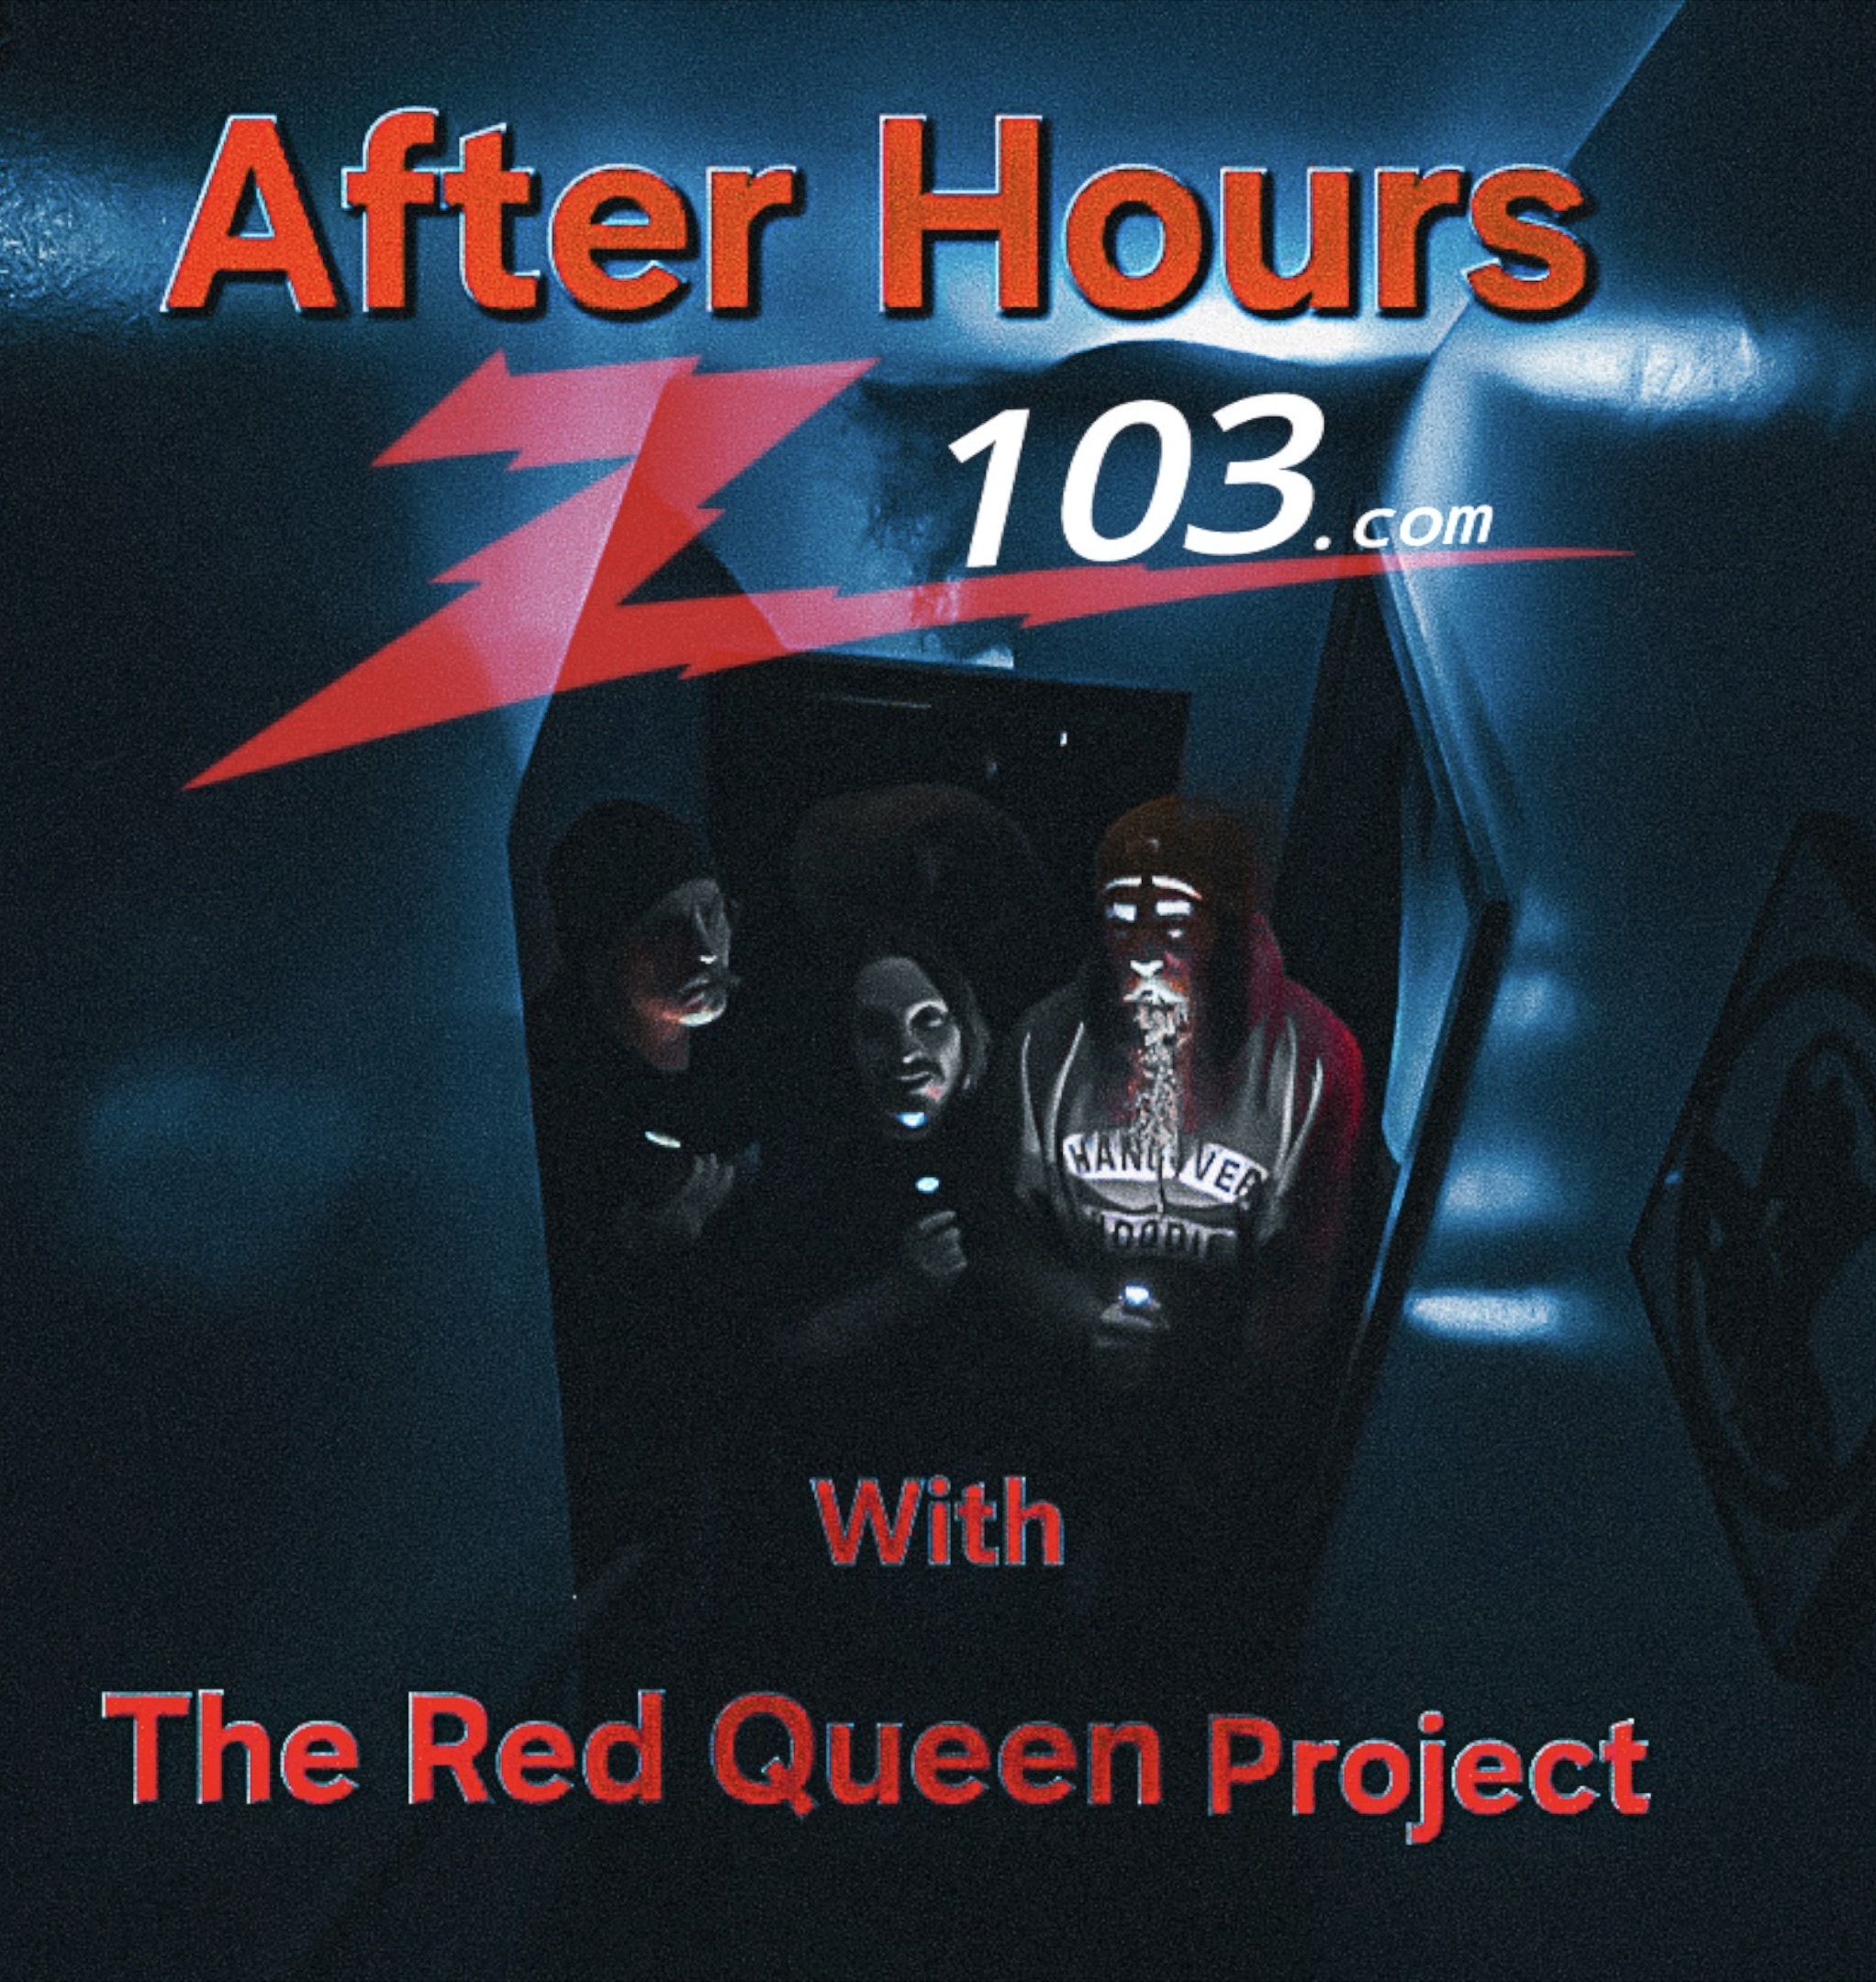 After Hours: With The Red Queen Project Z103.com